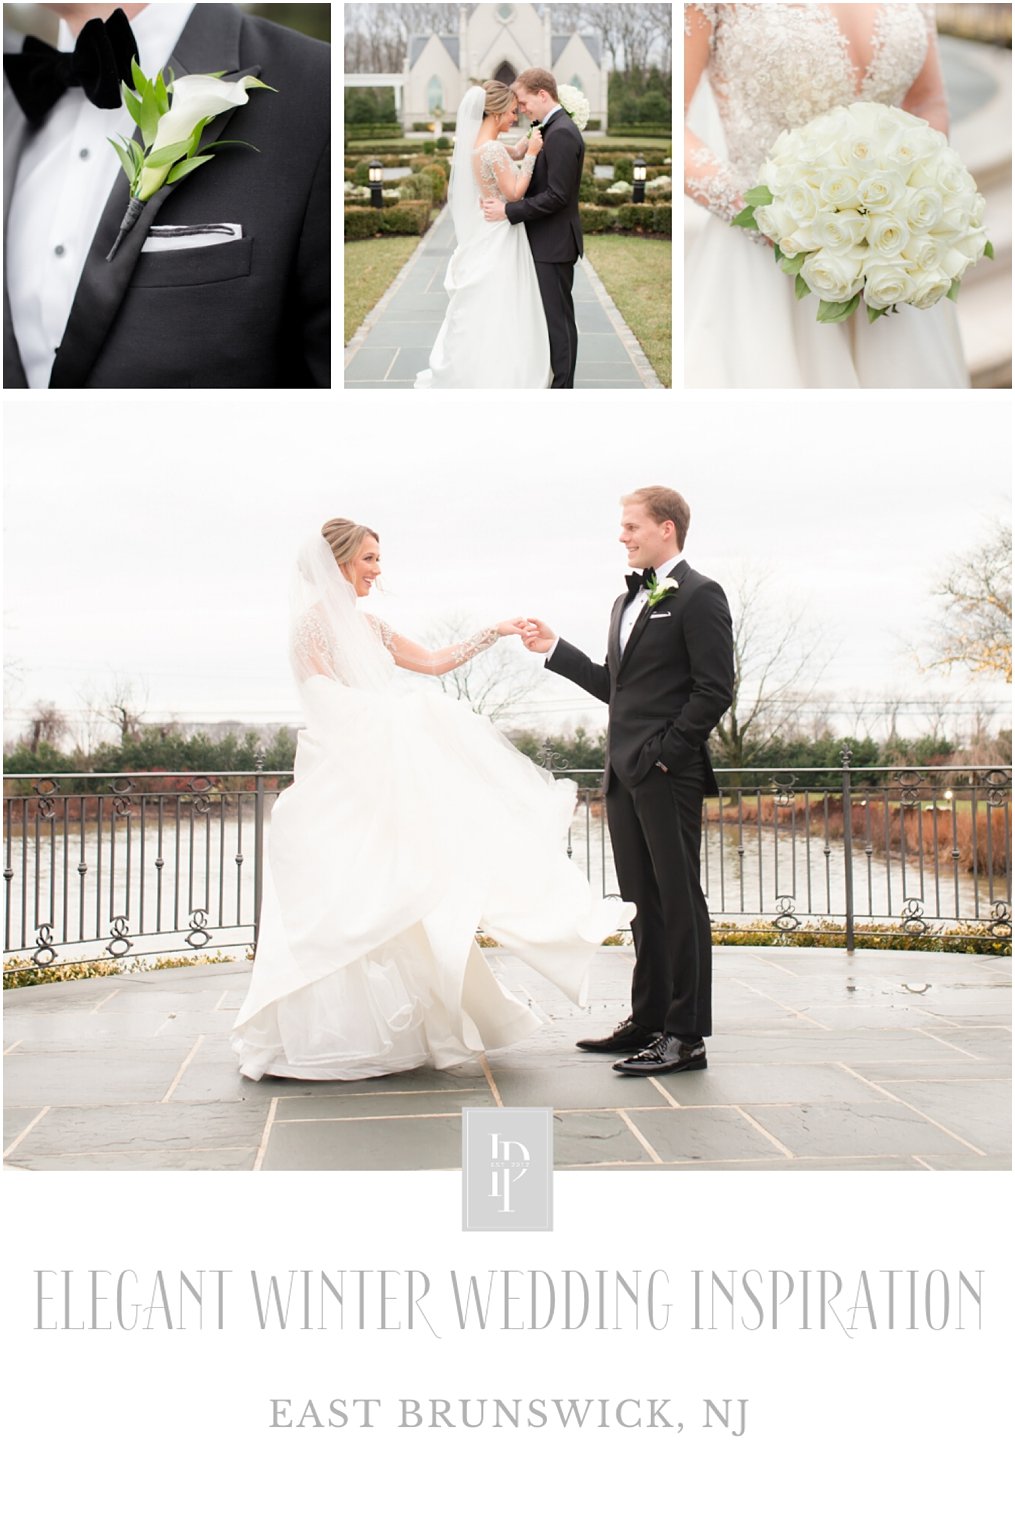 Planning a winter wedding at Park Chateau Estate and Gardens? Click here for ideas! | Photos by Idalia Photography